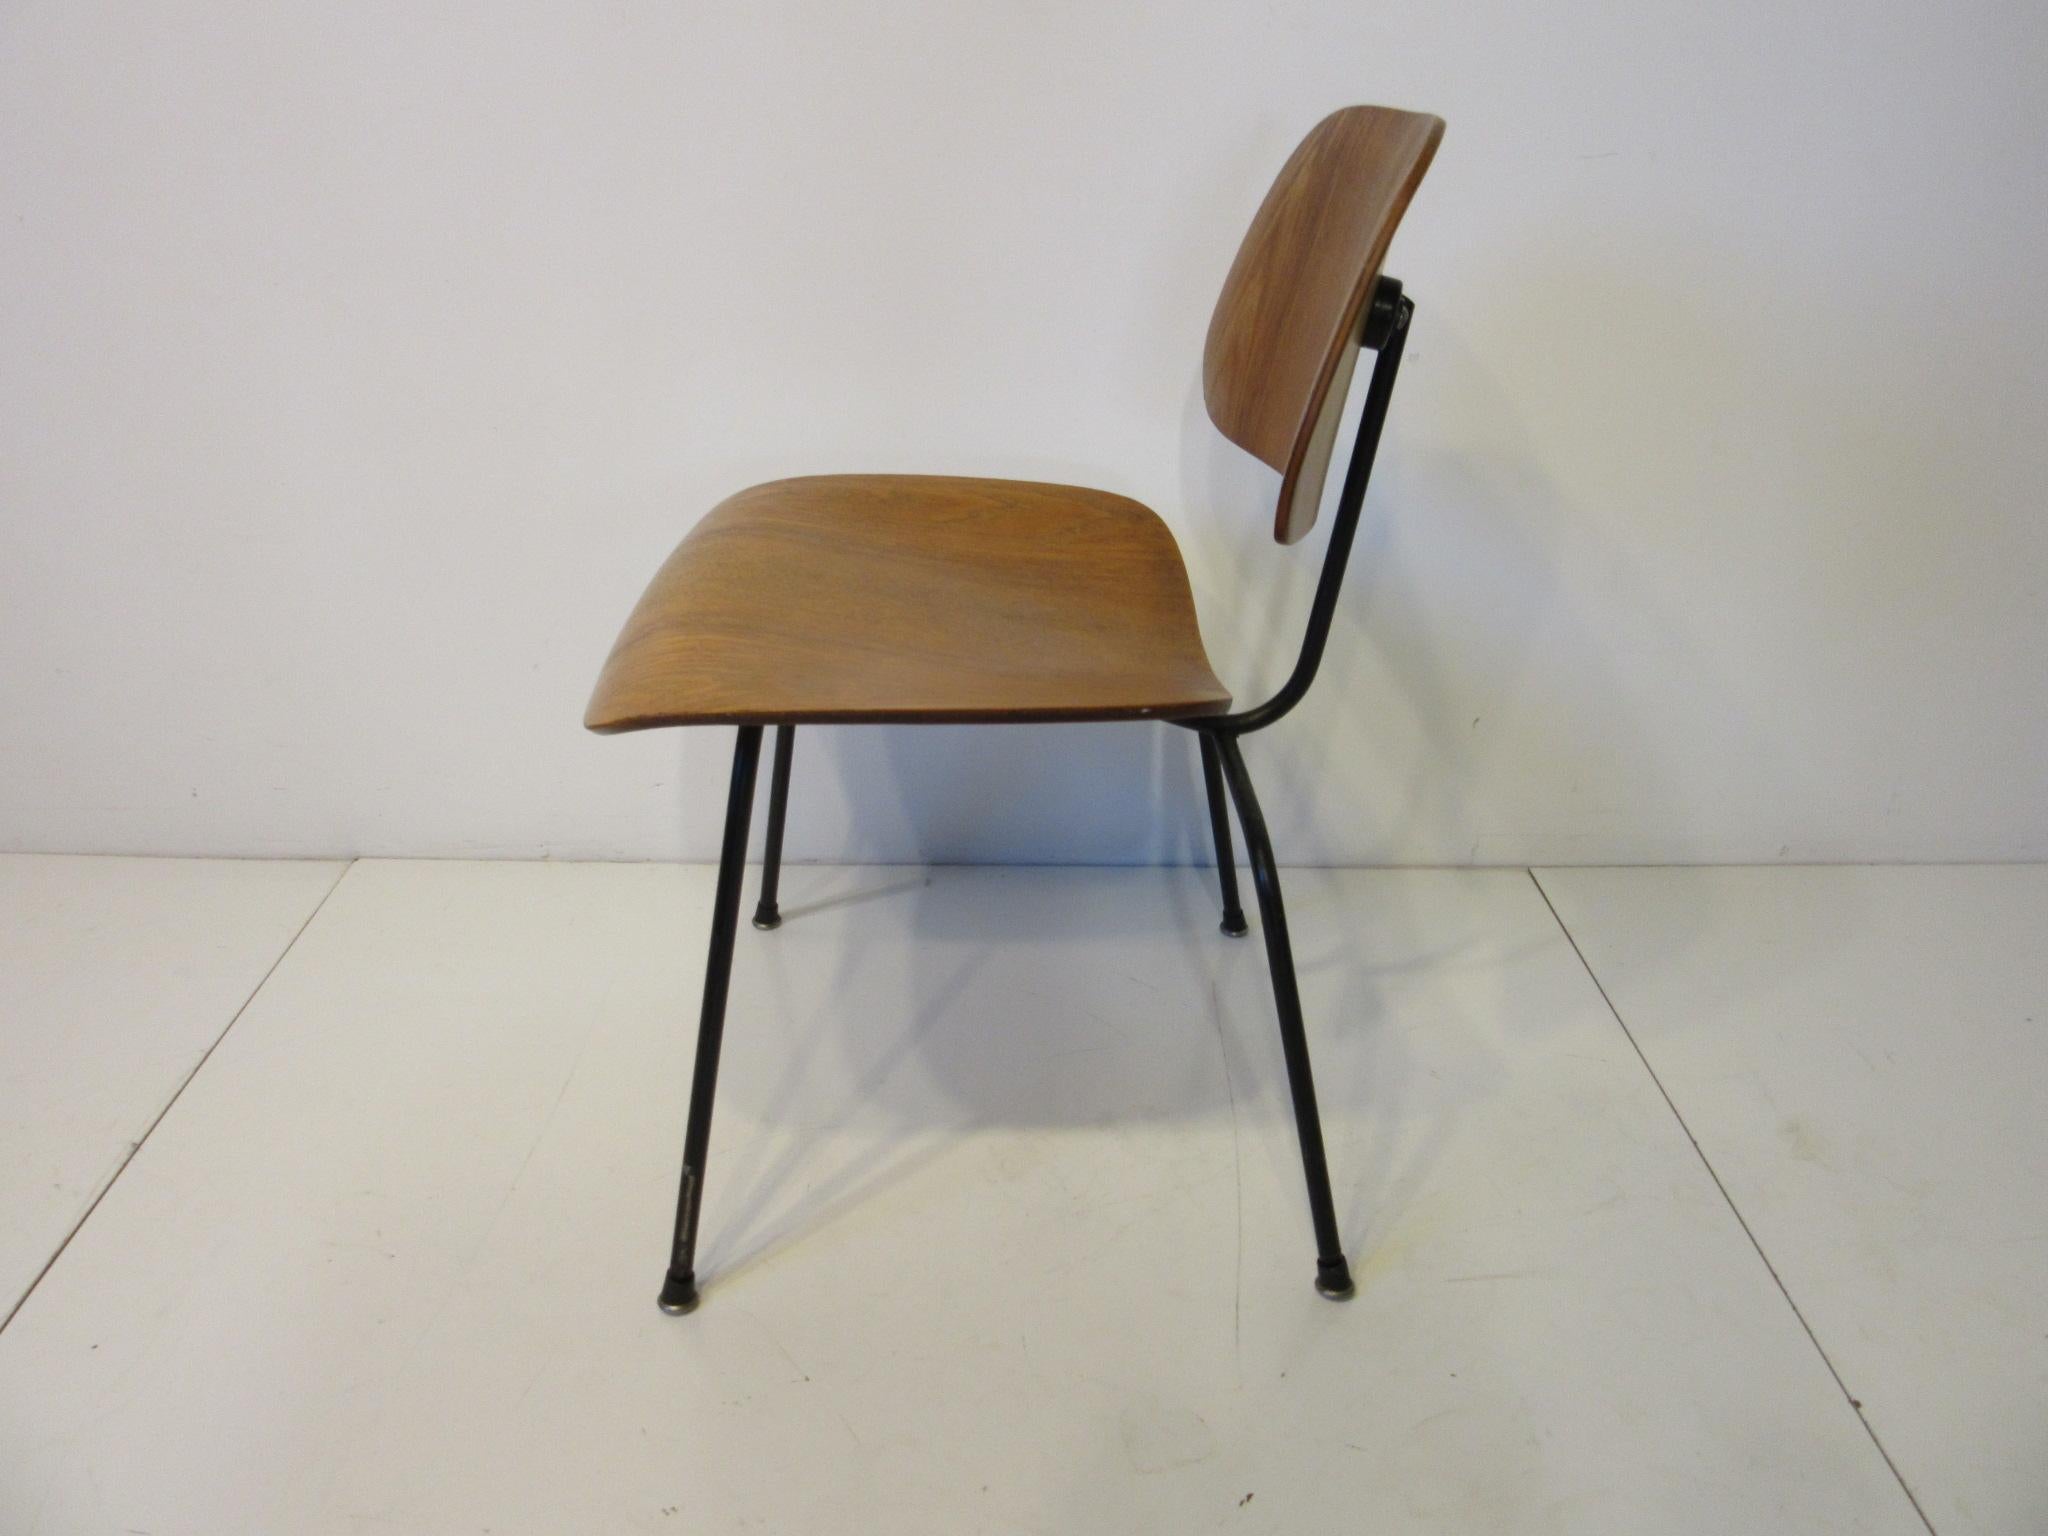 An early 1950s production molded wonderfully grained oakwood ply side chair with factory black metal frame, early patient and foil manufactures label and rubber metal boot styled feet. Purchased from the original owners made by the Herman Miller